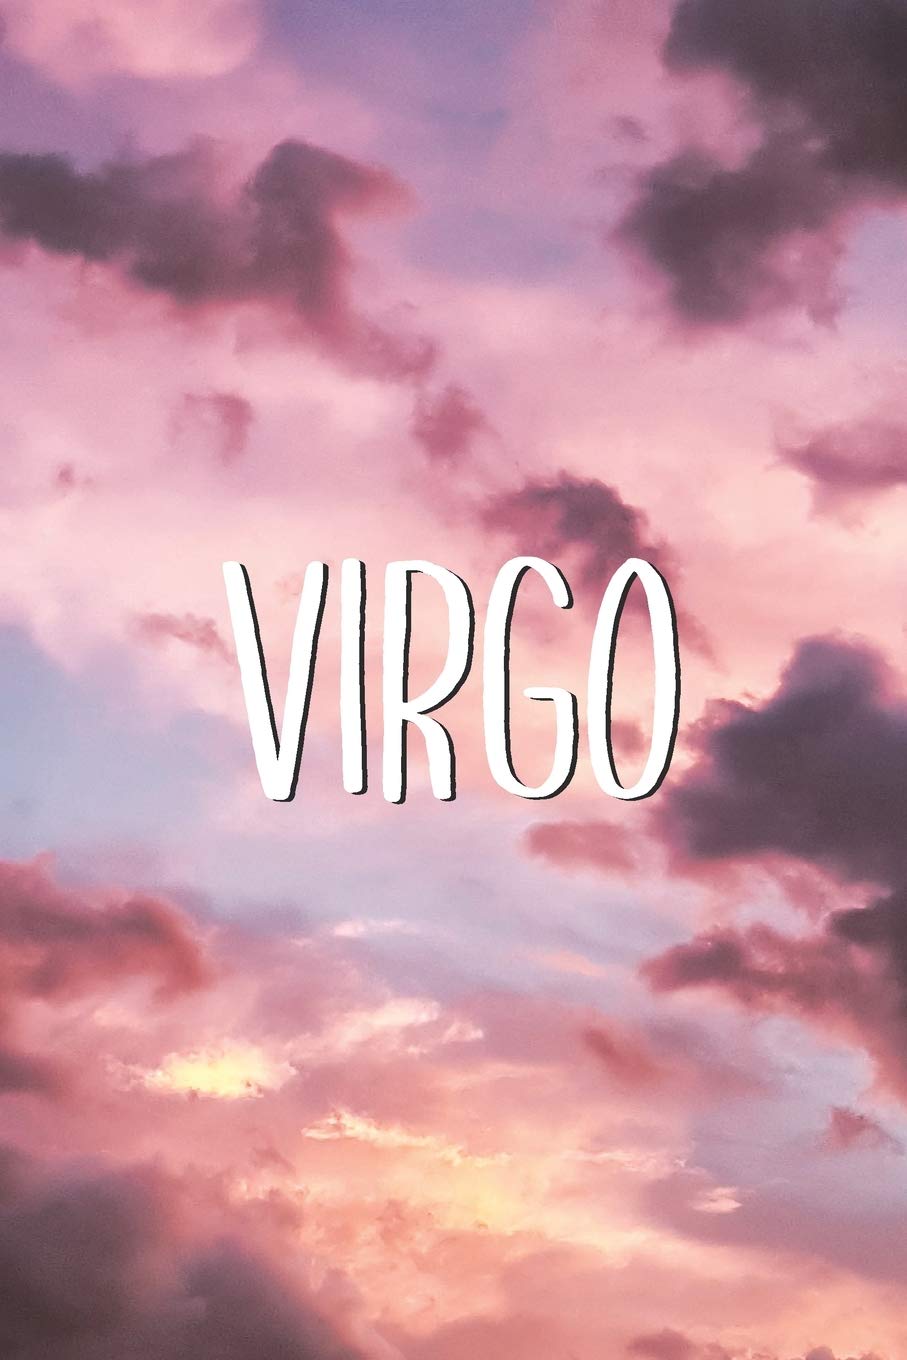 A photo of the word virgo in pink and purple - Virgo